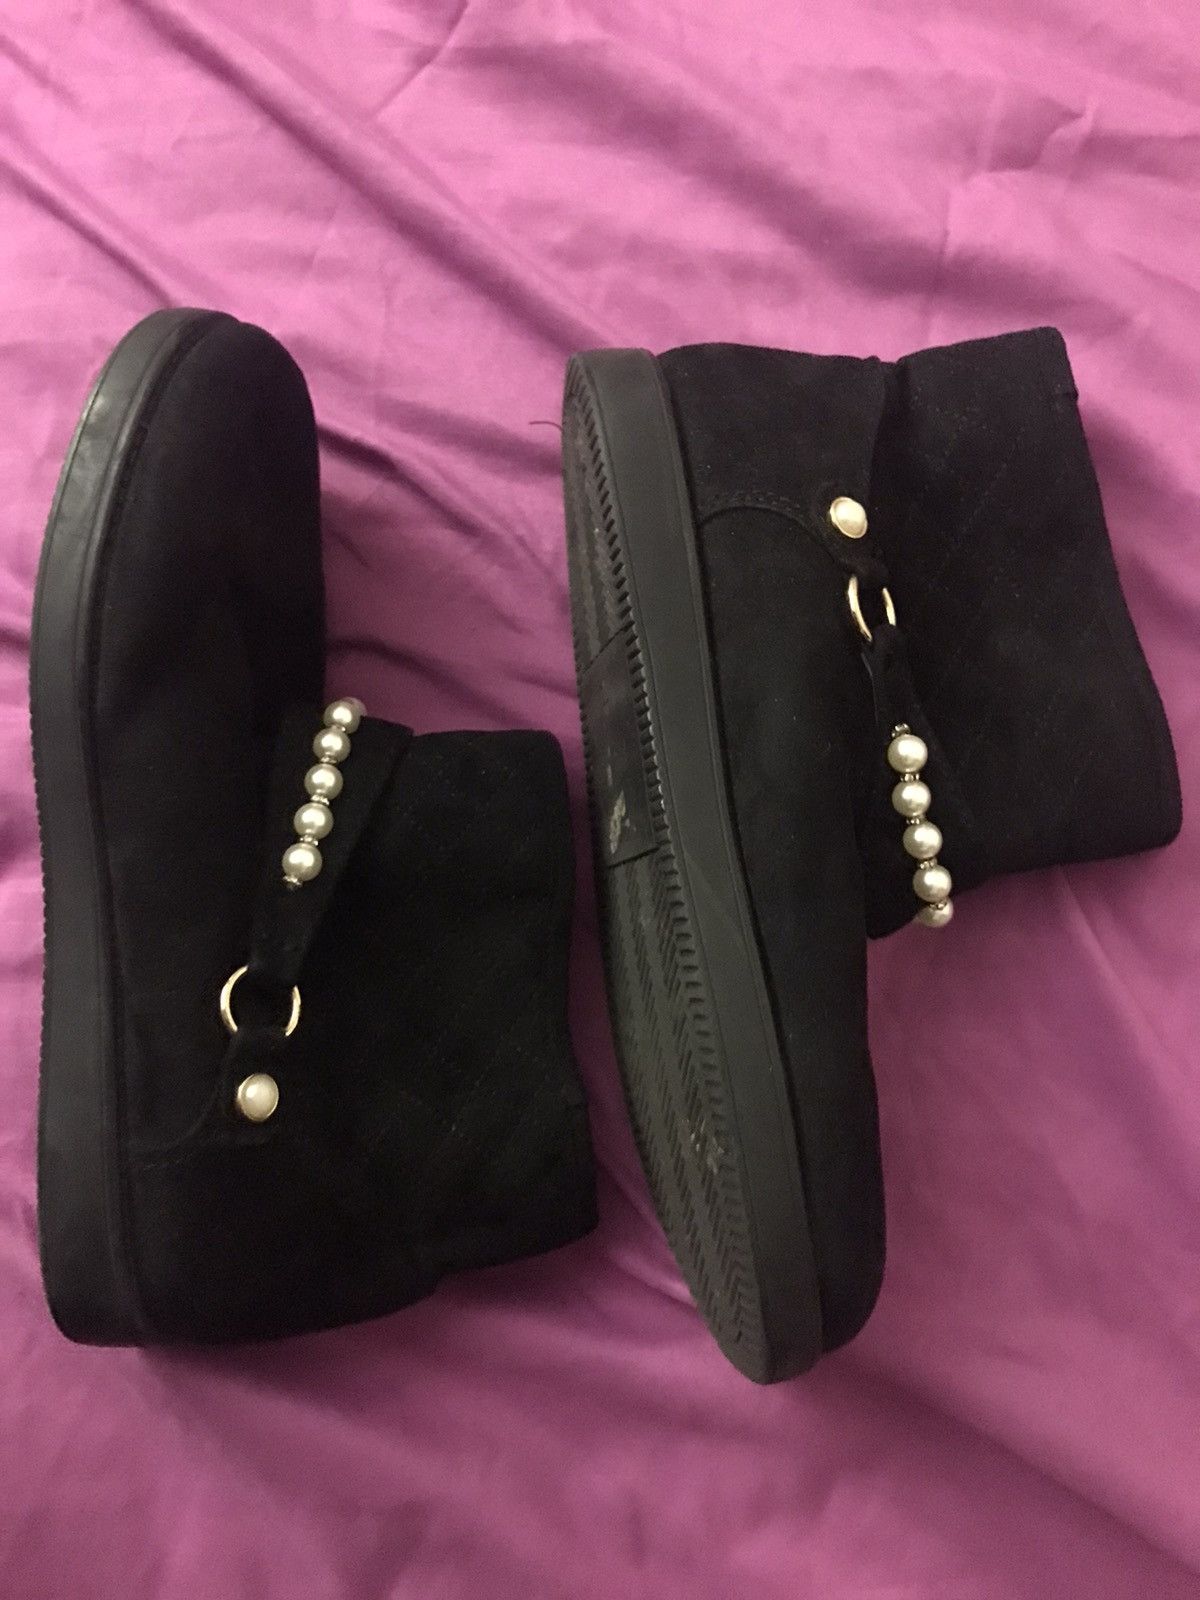 The Unbranded Brand Women’s Winter Boots With Fur & Beads Size US 10 / IT 40 - 5 Thumbnail